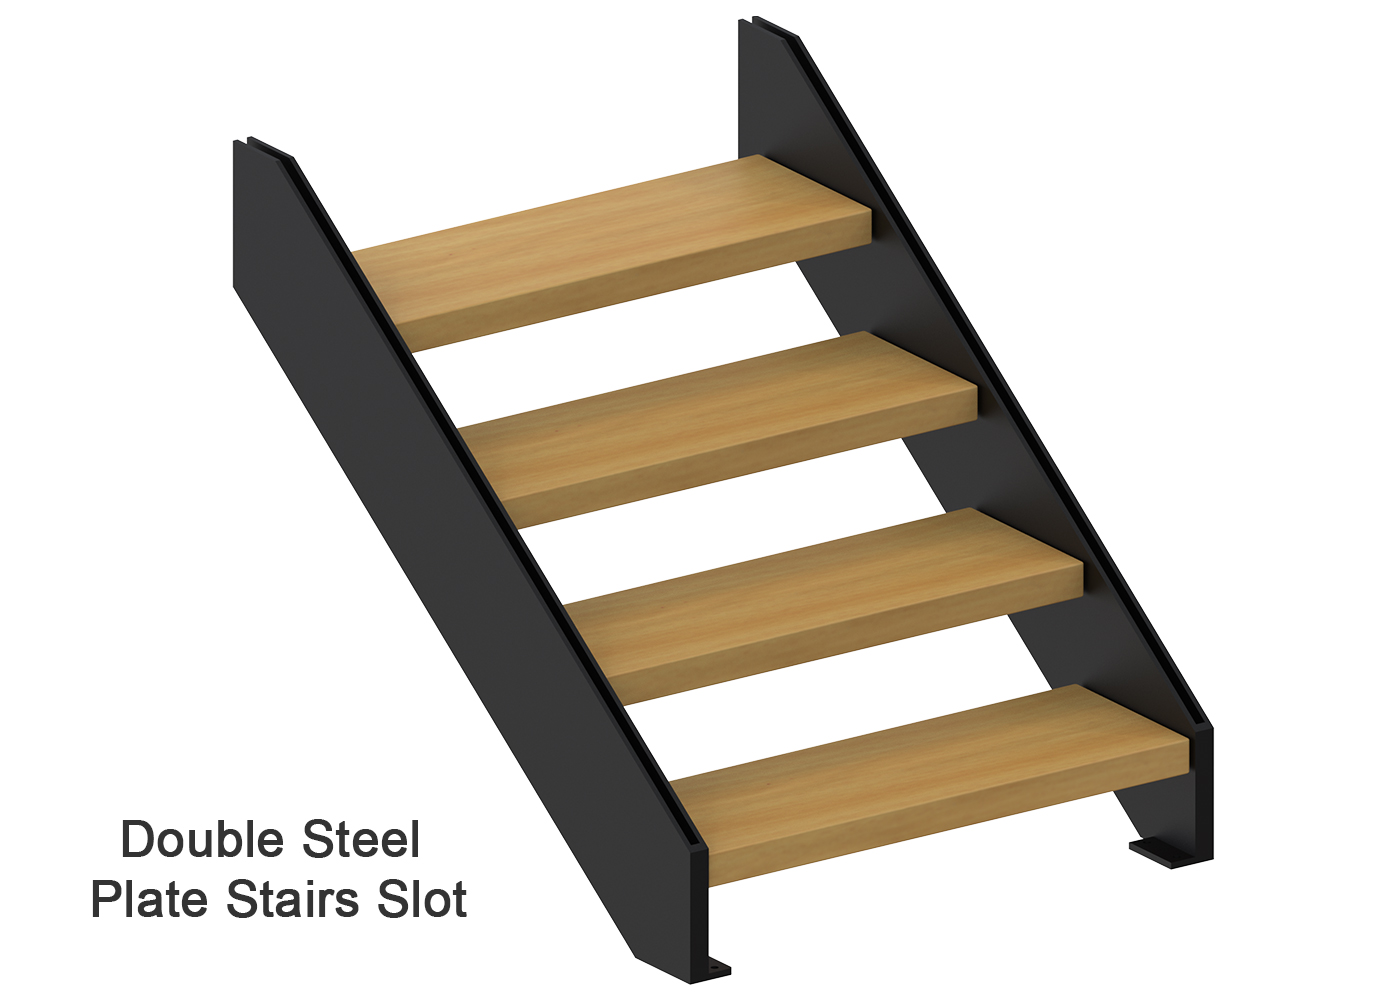 Double Steel Plate Stairs